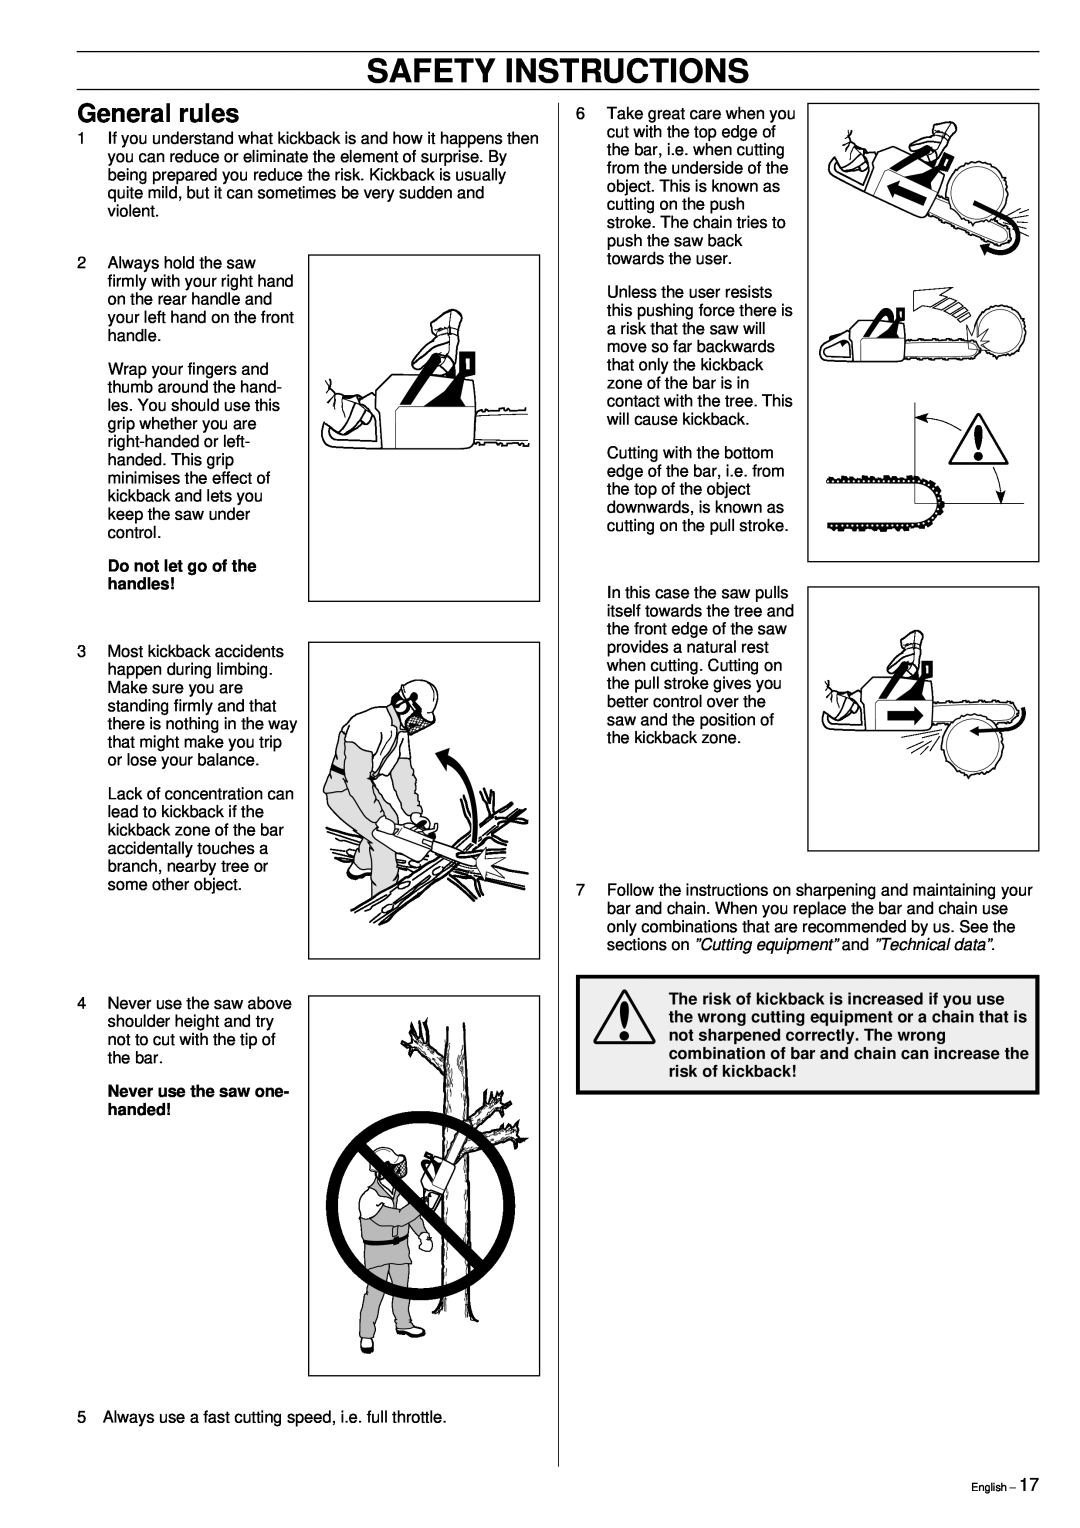 Husqvarna 395XP manual Safety Instructions, General rules, Do not let go of the handles, Never use the saw one- handed 